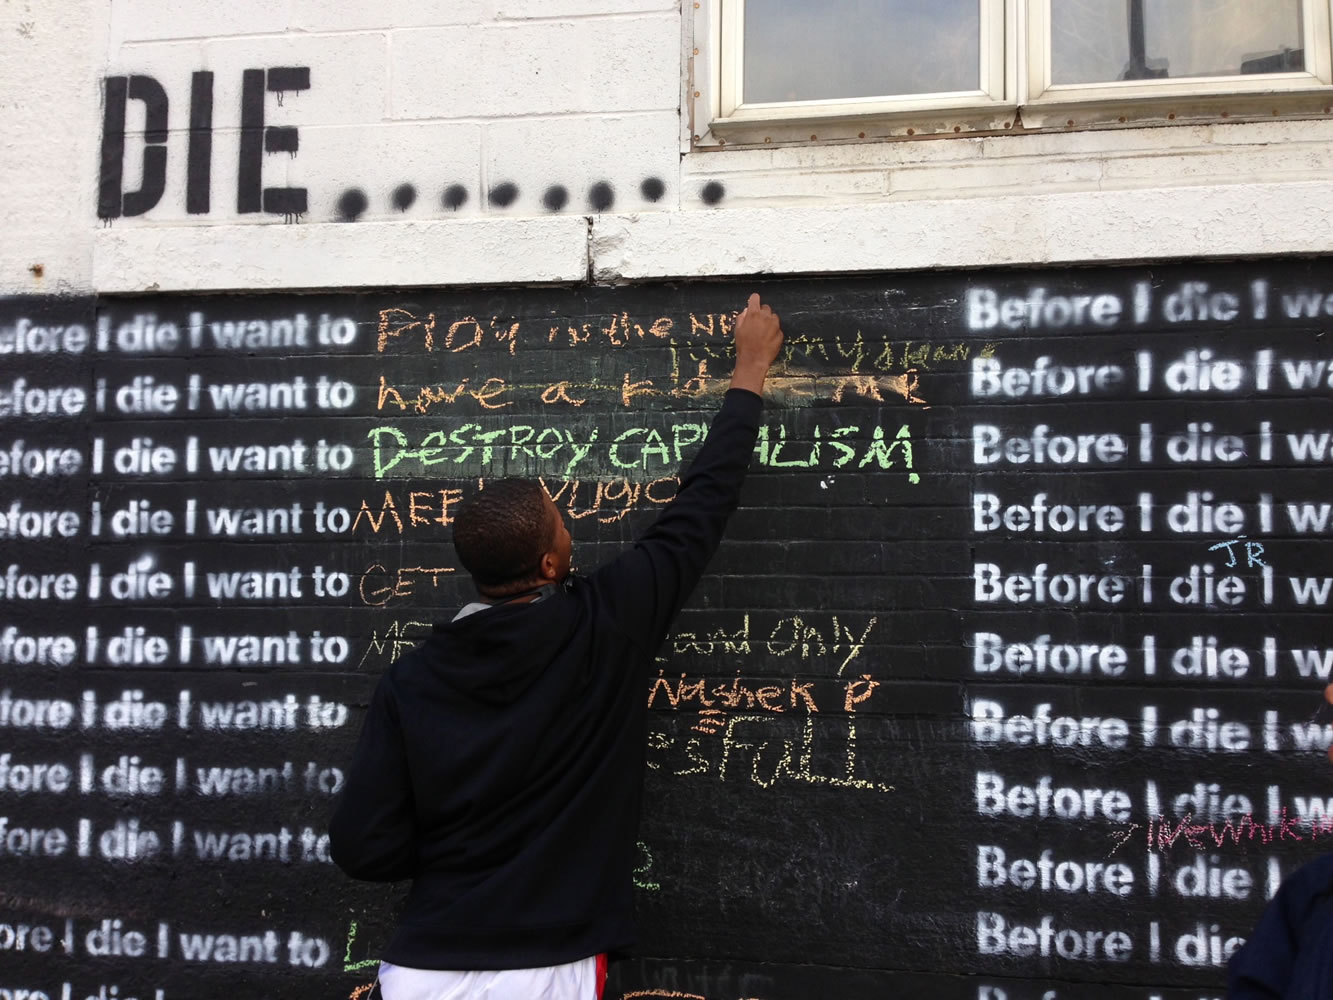 Nyquis Turner, 16, writes &quot;Play in the NFL&quot; on a wall in Syracuse, N.Y., that invites passers-by to complete the sentence: &quot;Before I die, I want to...&quot;  The global phenomenon started in 2011, when artist Candy Chang created the first wall on an abandoned house in her New Orleans neighborhood.